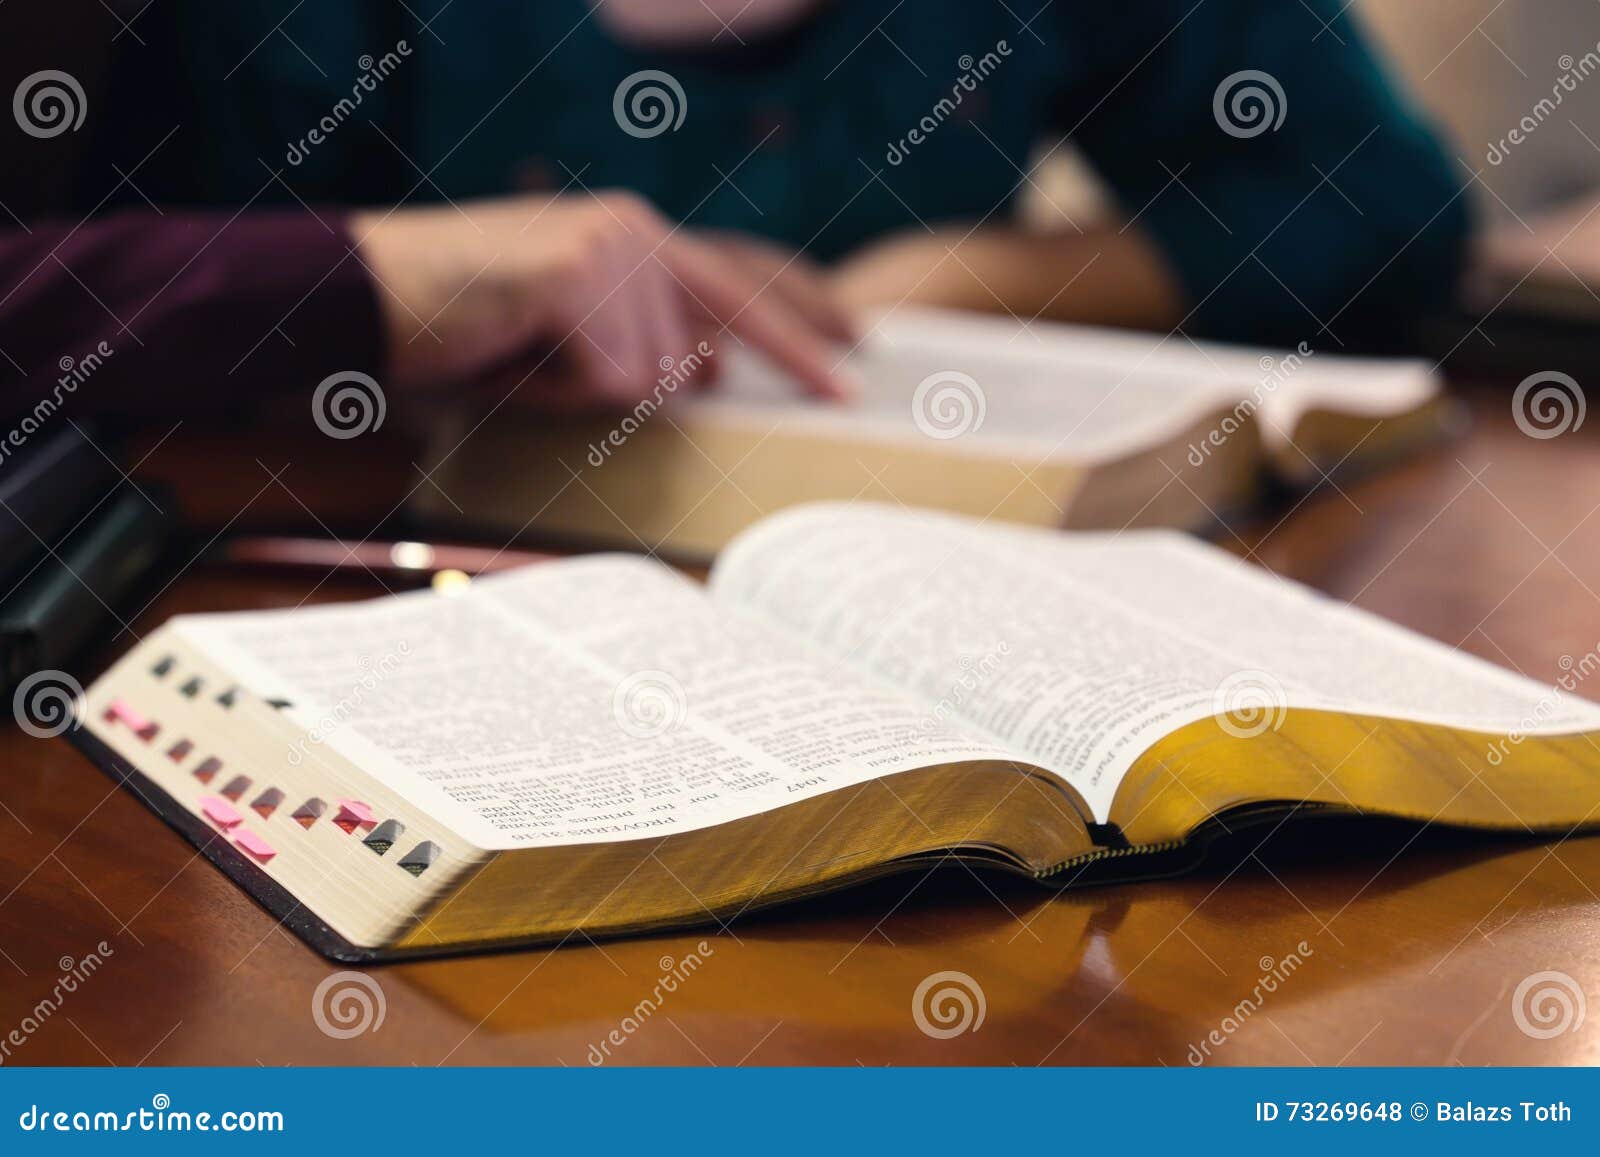 young couple studying the bible